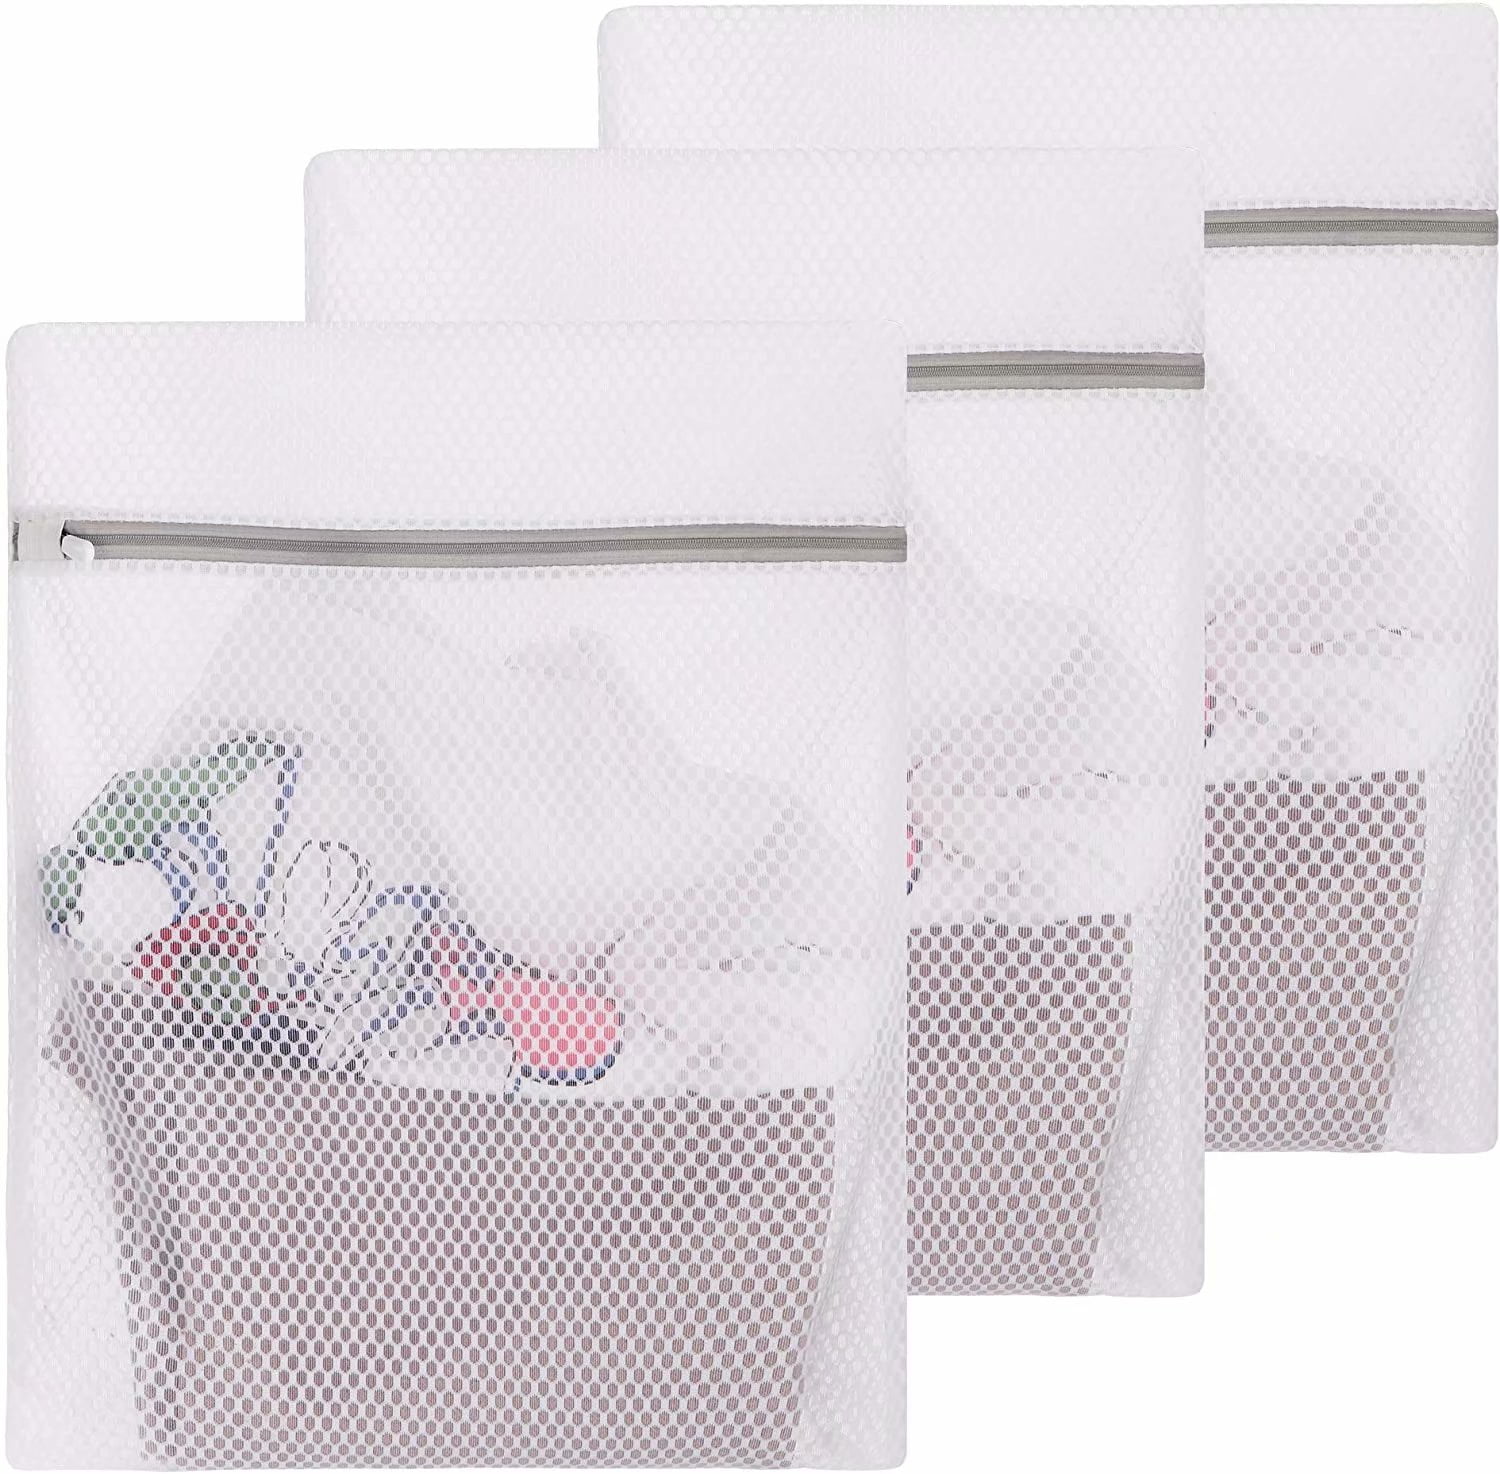 Large Washing Bag, 3 Pack Durable Honeycomb Mesh Laundry Bags for ...